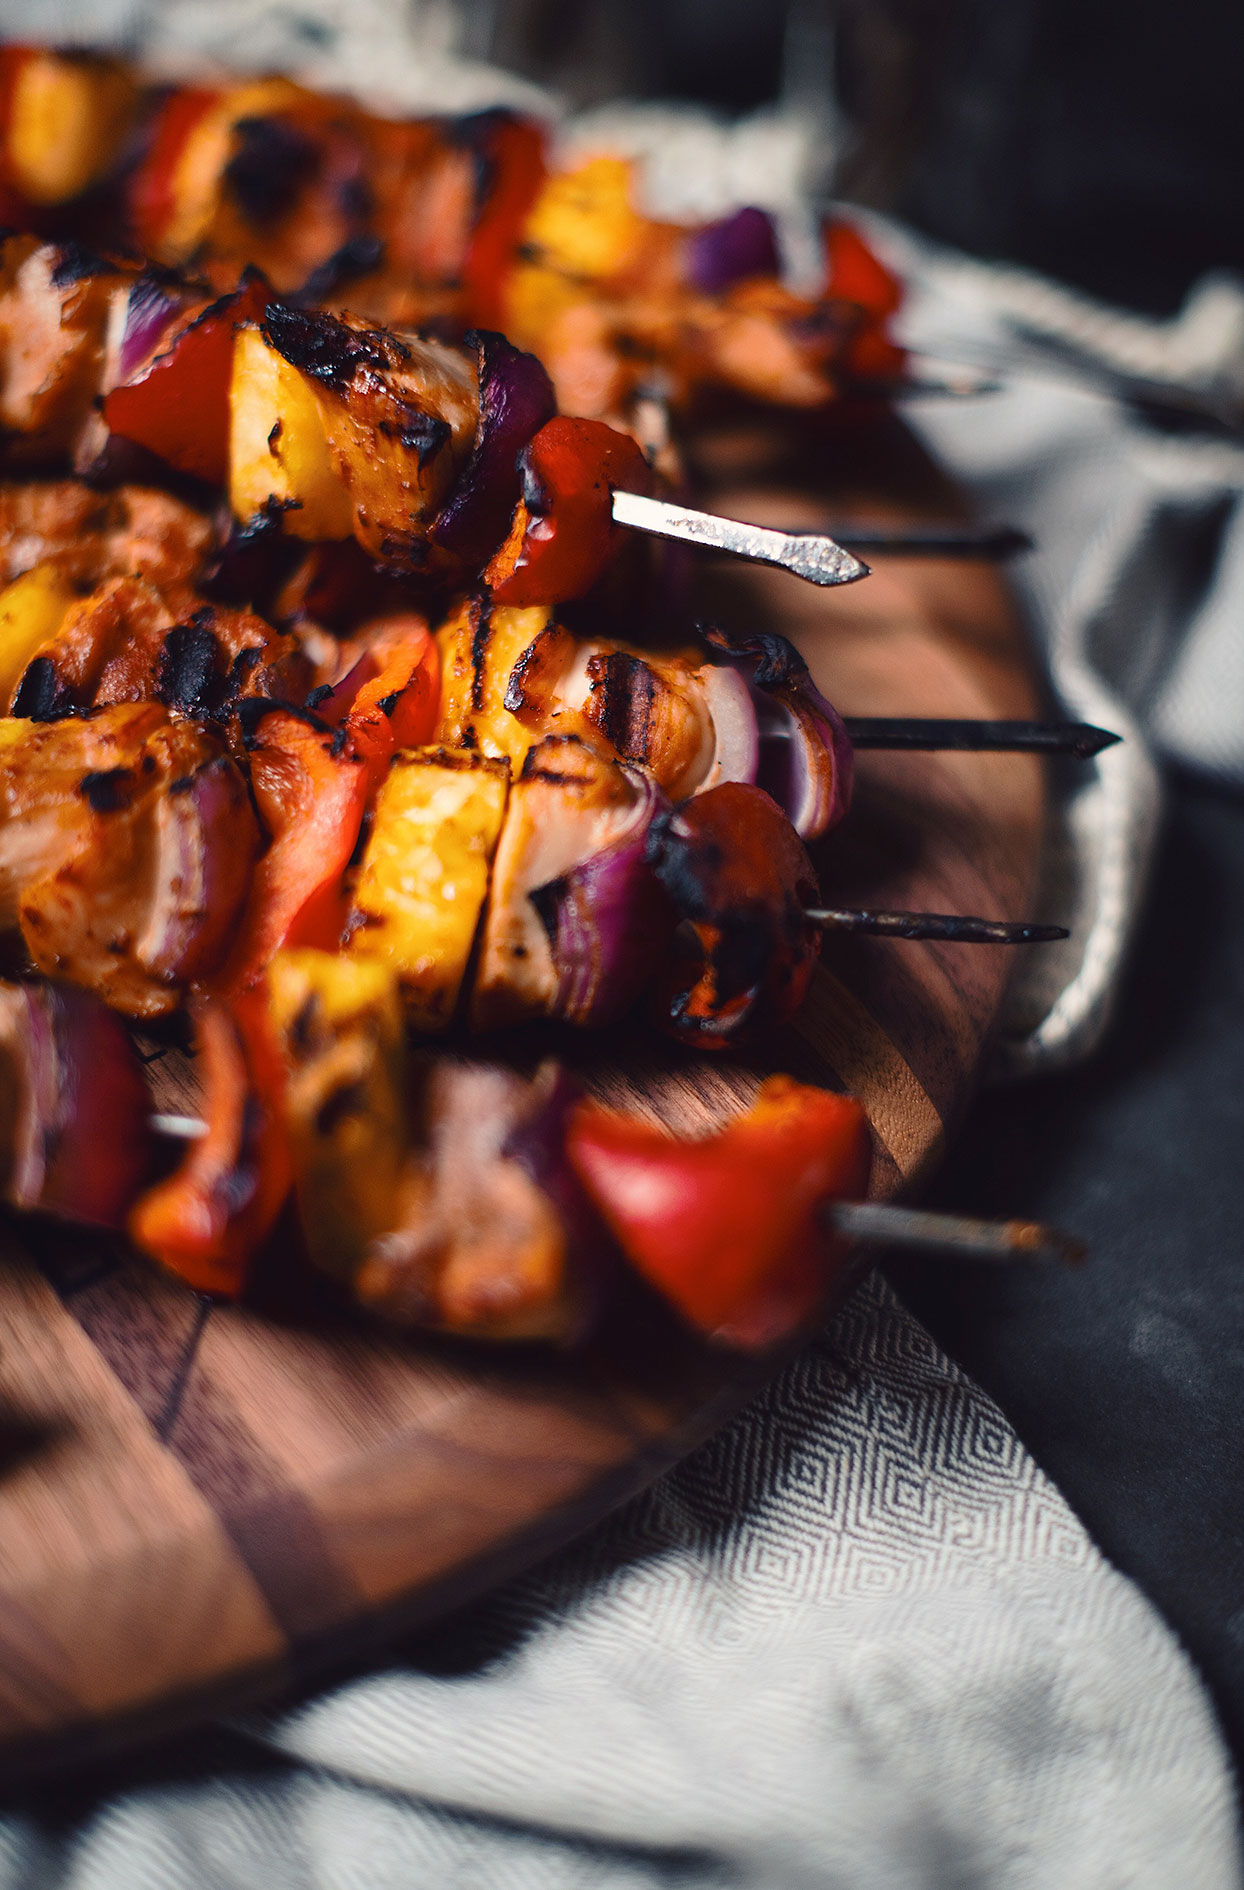 Chicken and pineapple skewers with whiskey and brown sugar